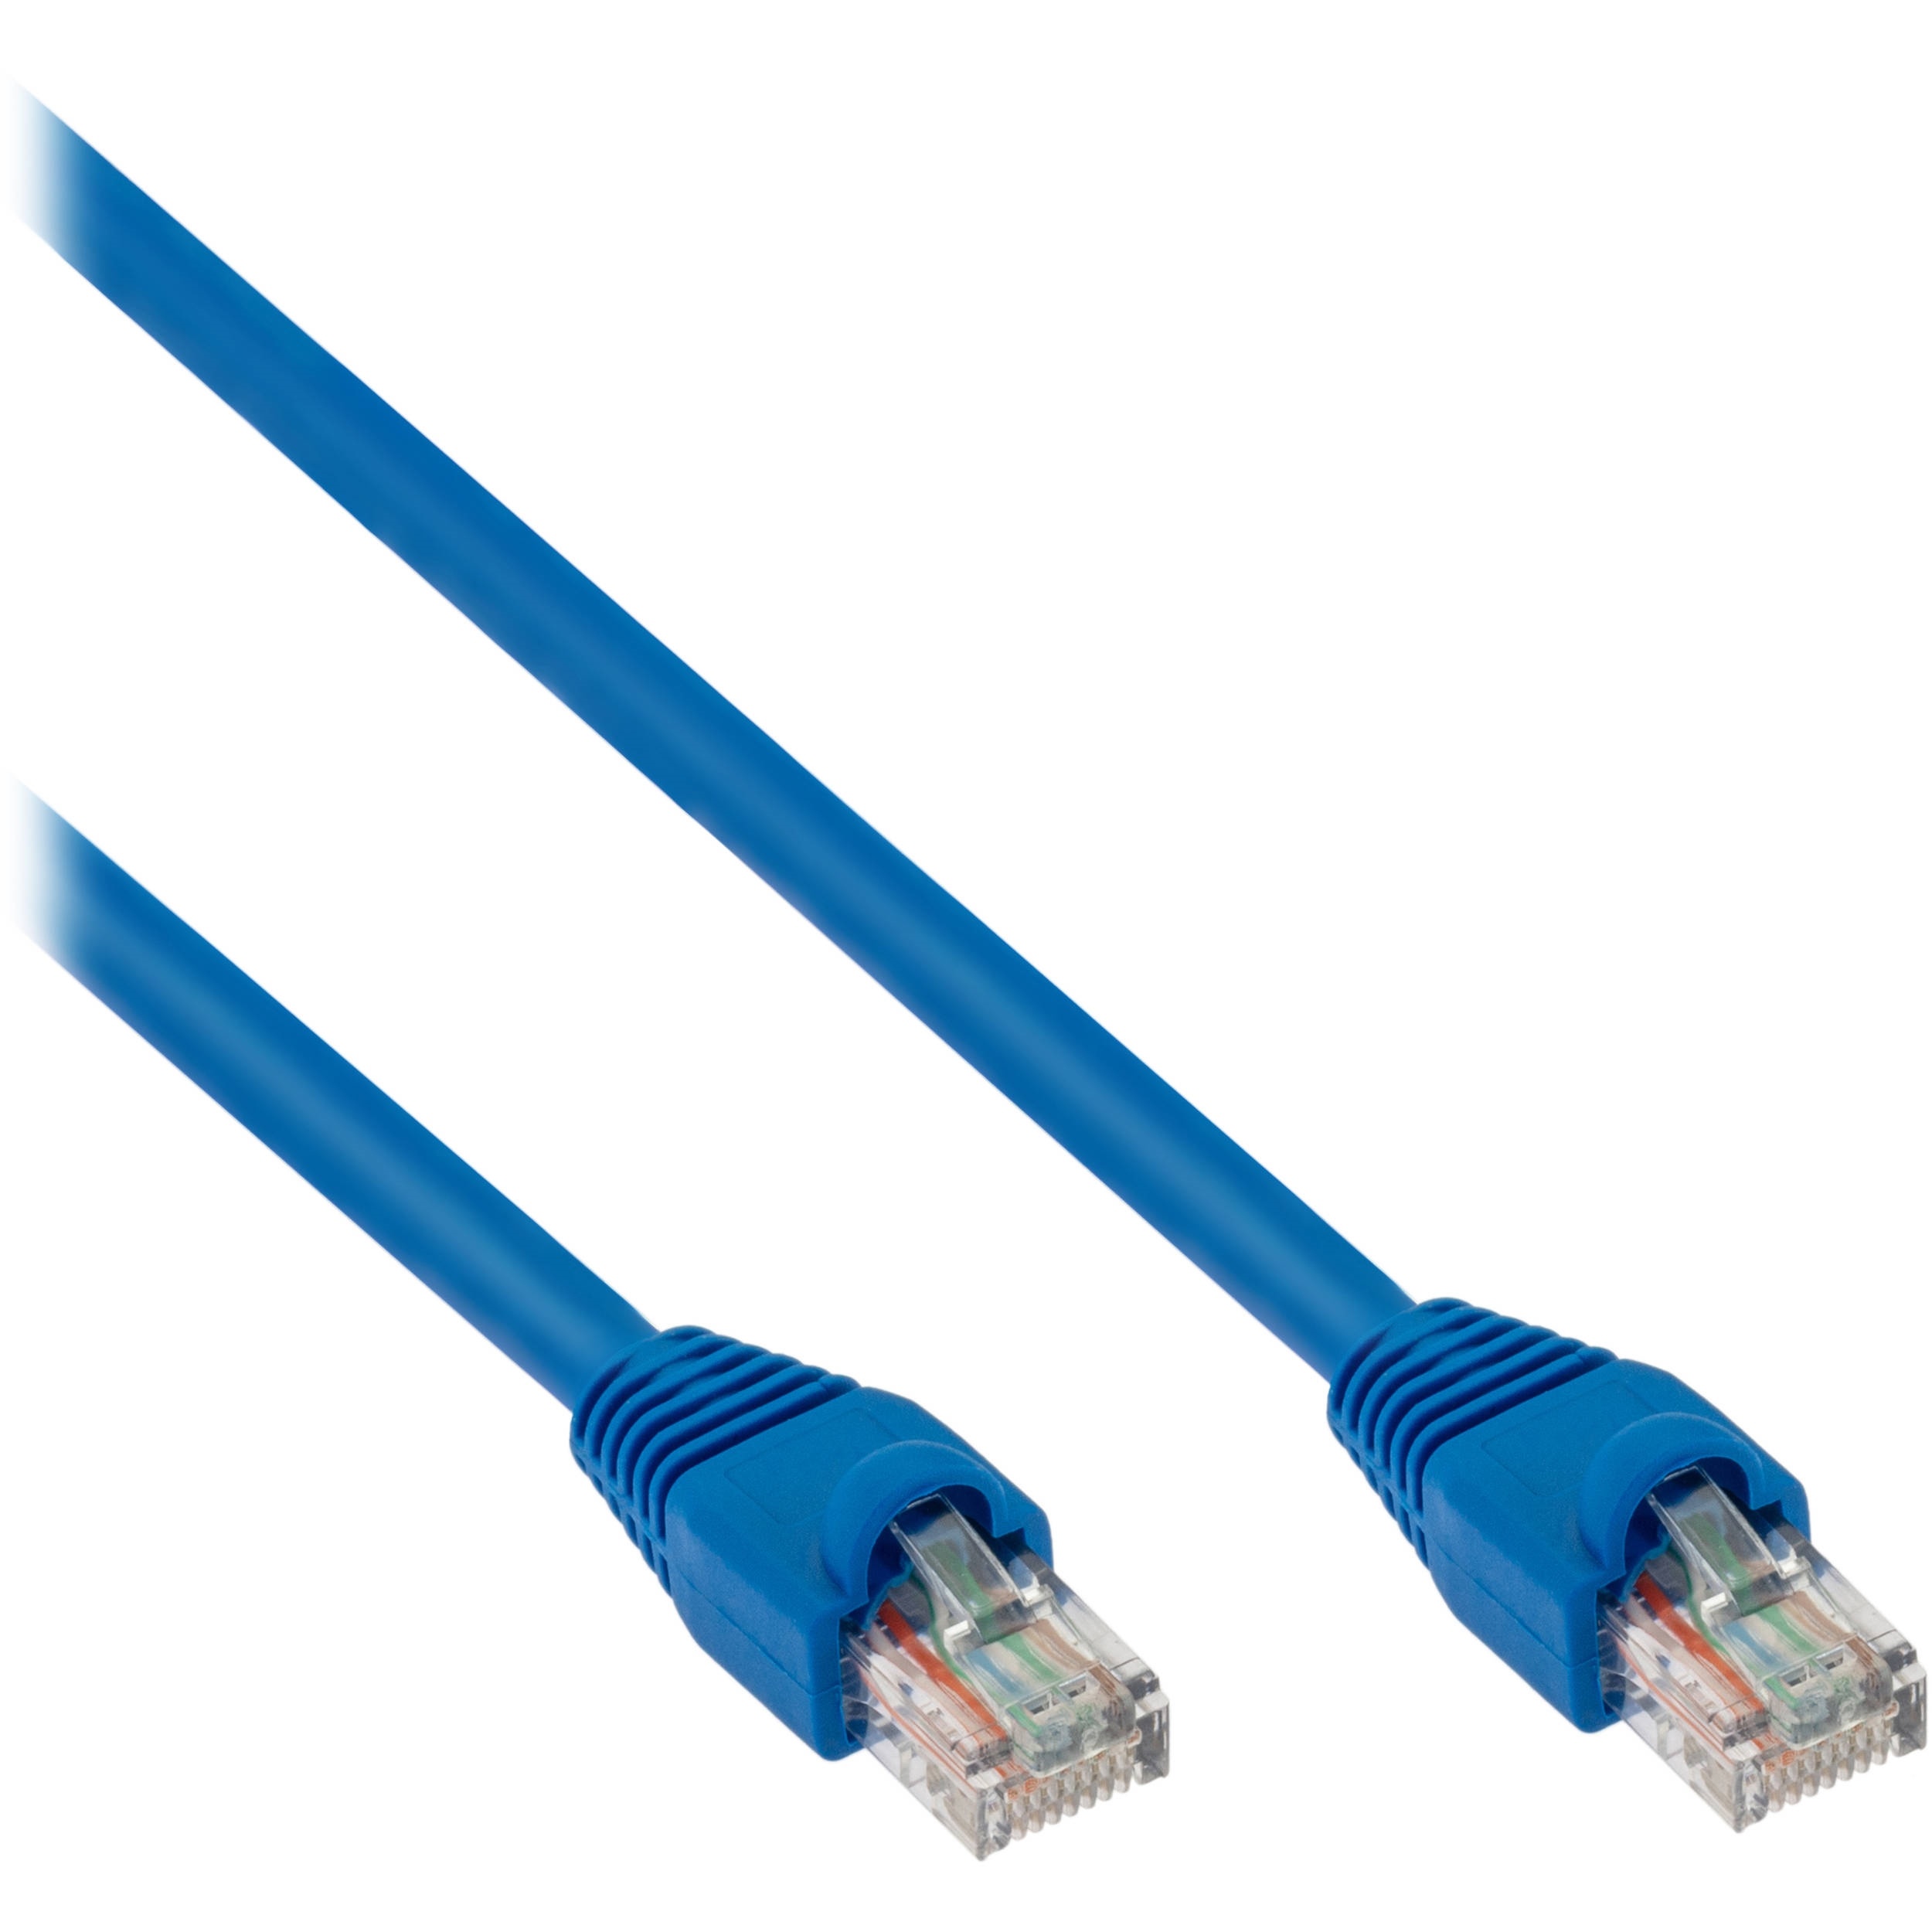 Pearstone Cat 6a Snagless Patch Cable (25', Blue)